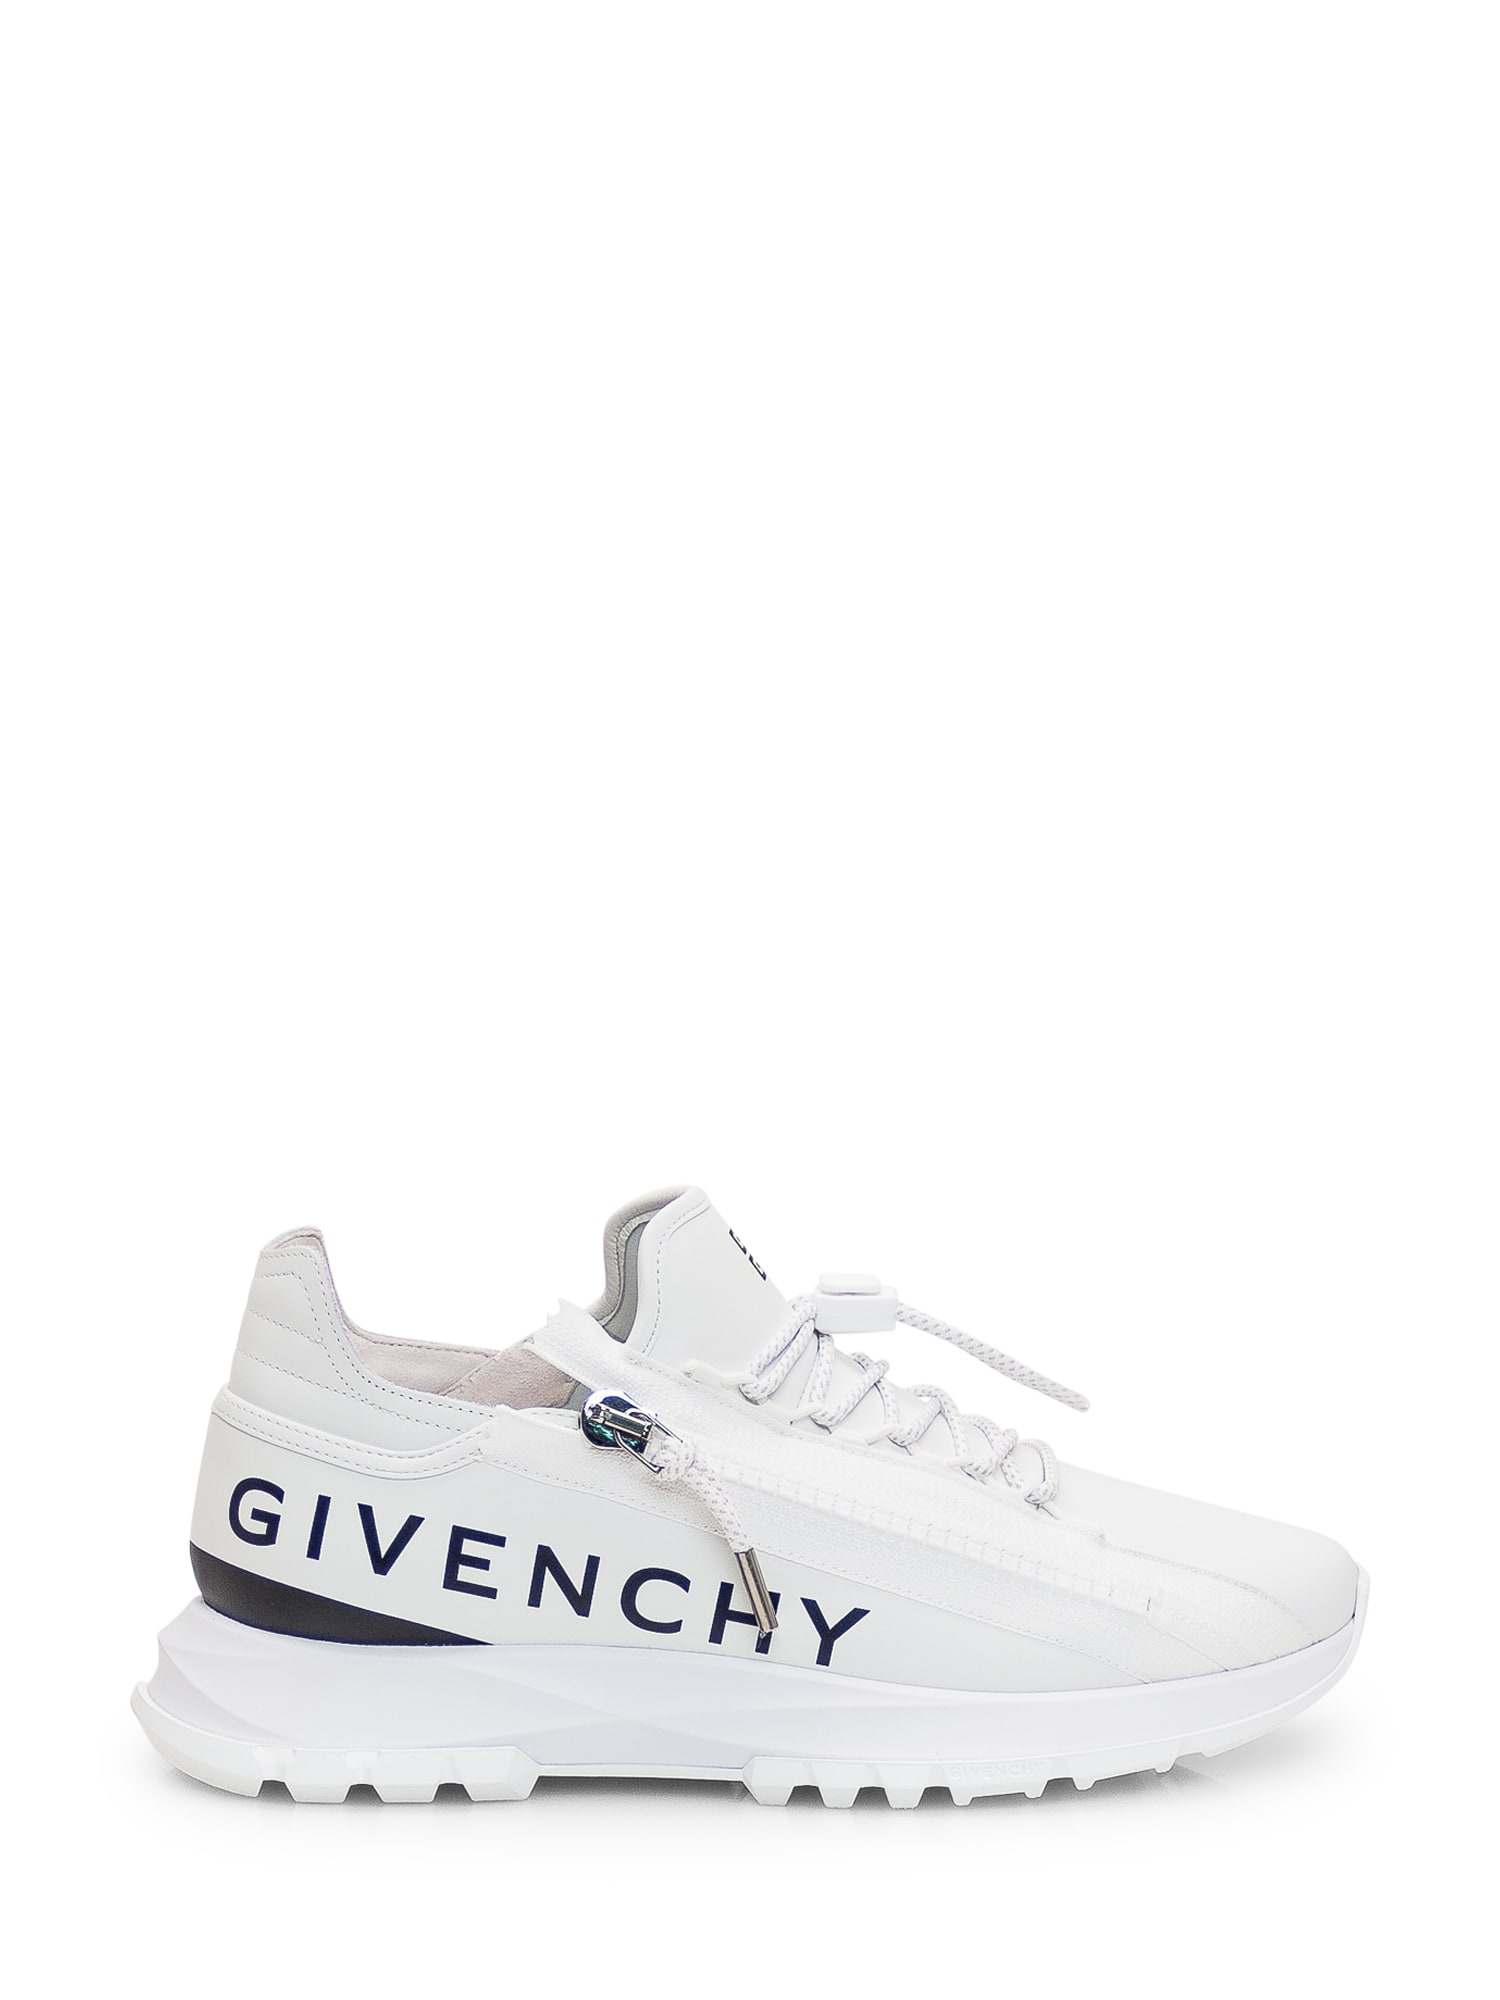 GIVENCHY RUNNING SNEAKER BY SPECTRE